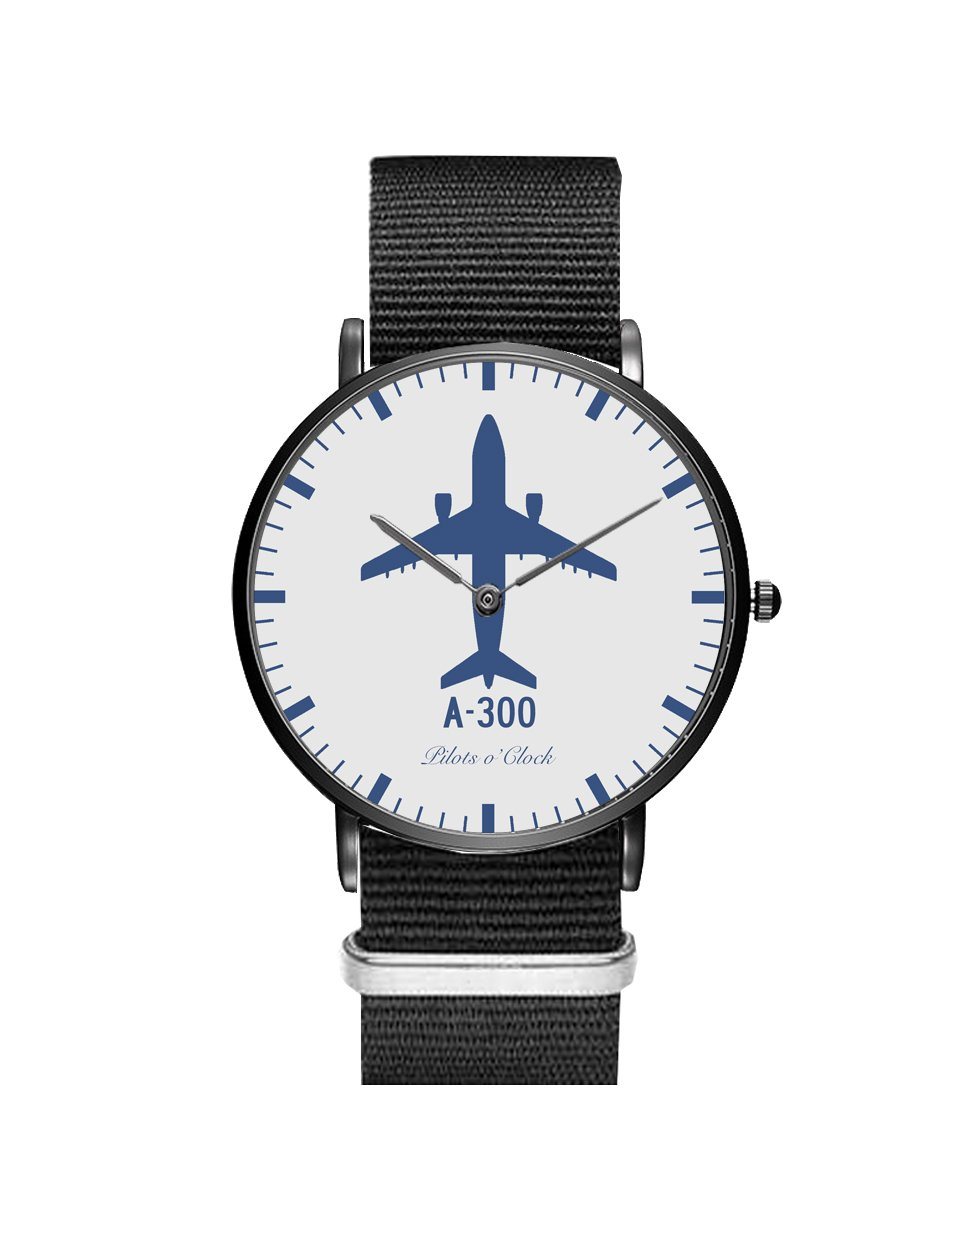 Airbus A300 Leather Strap Watches Pilot Eyes Store 